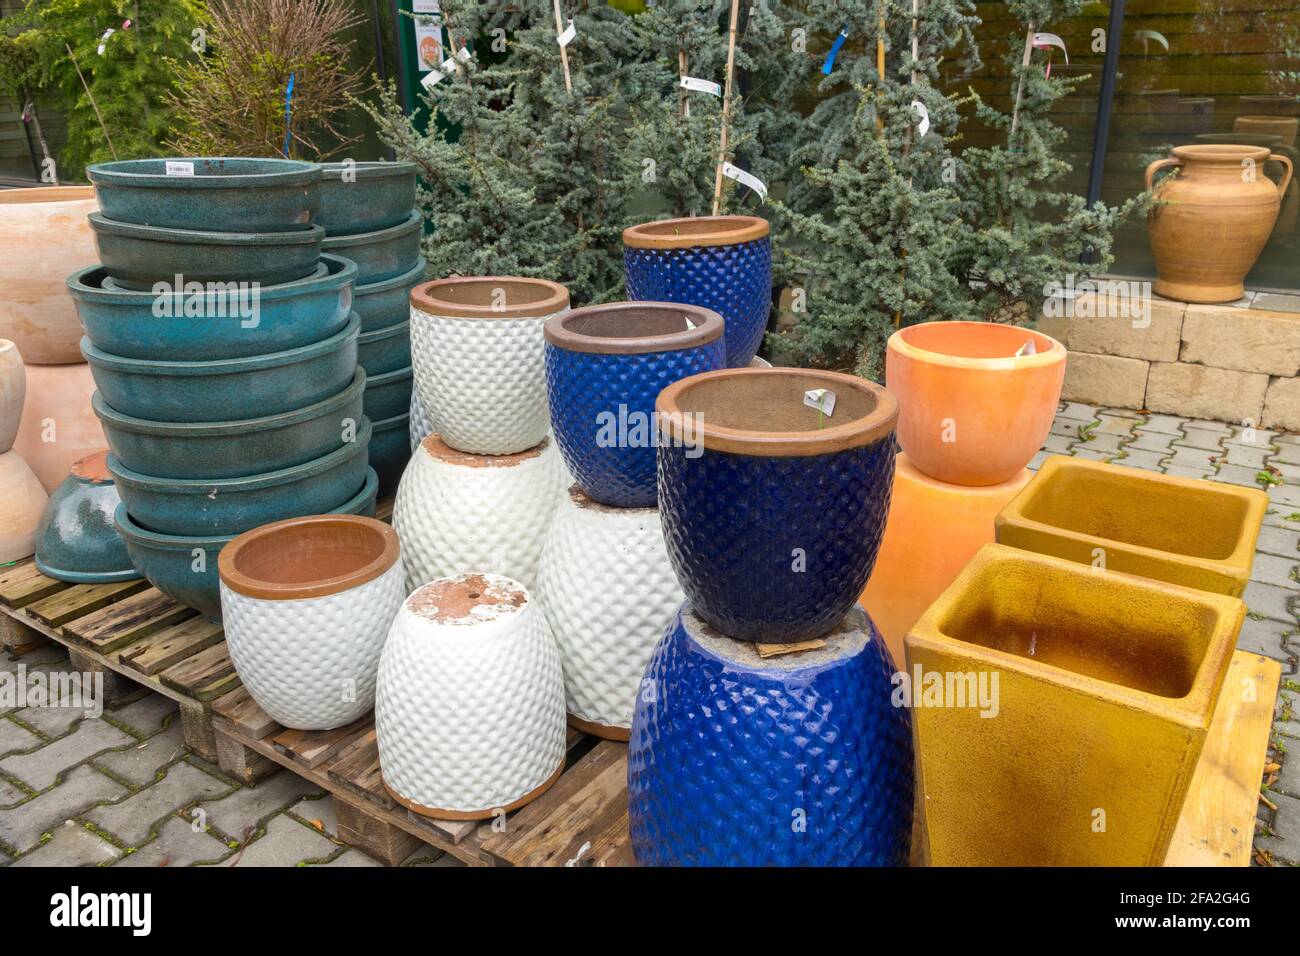 Flowerpots and various containers for sale in the garden centre Stock Photo